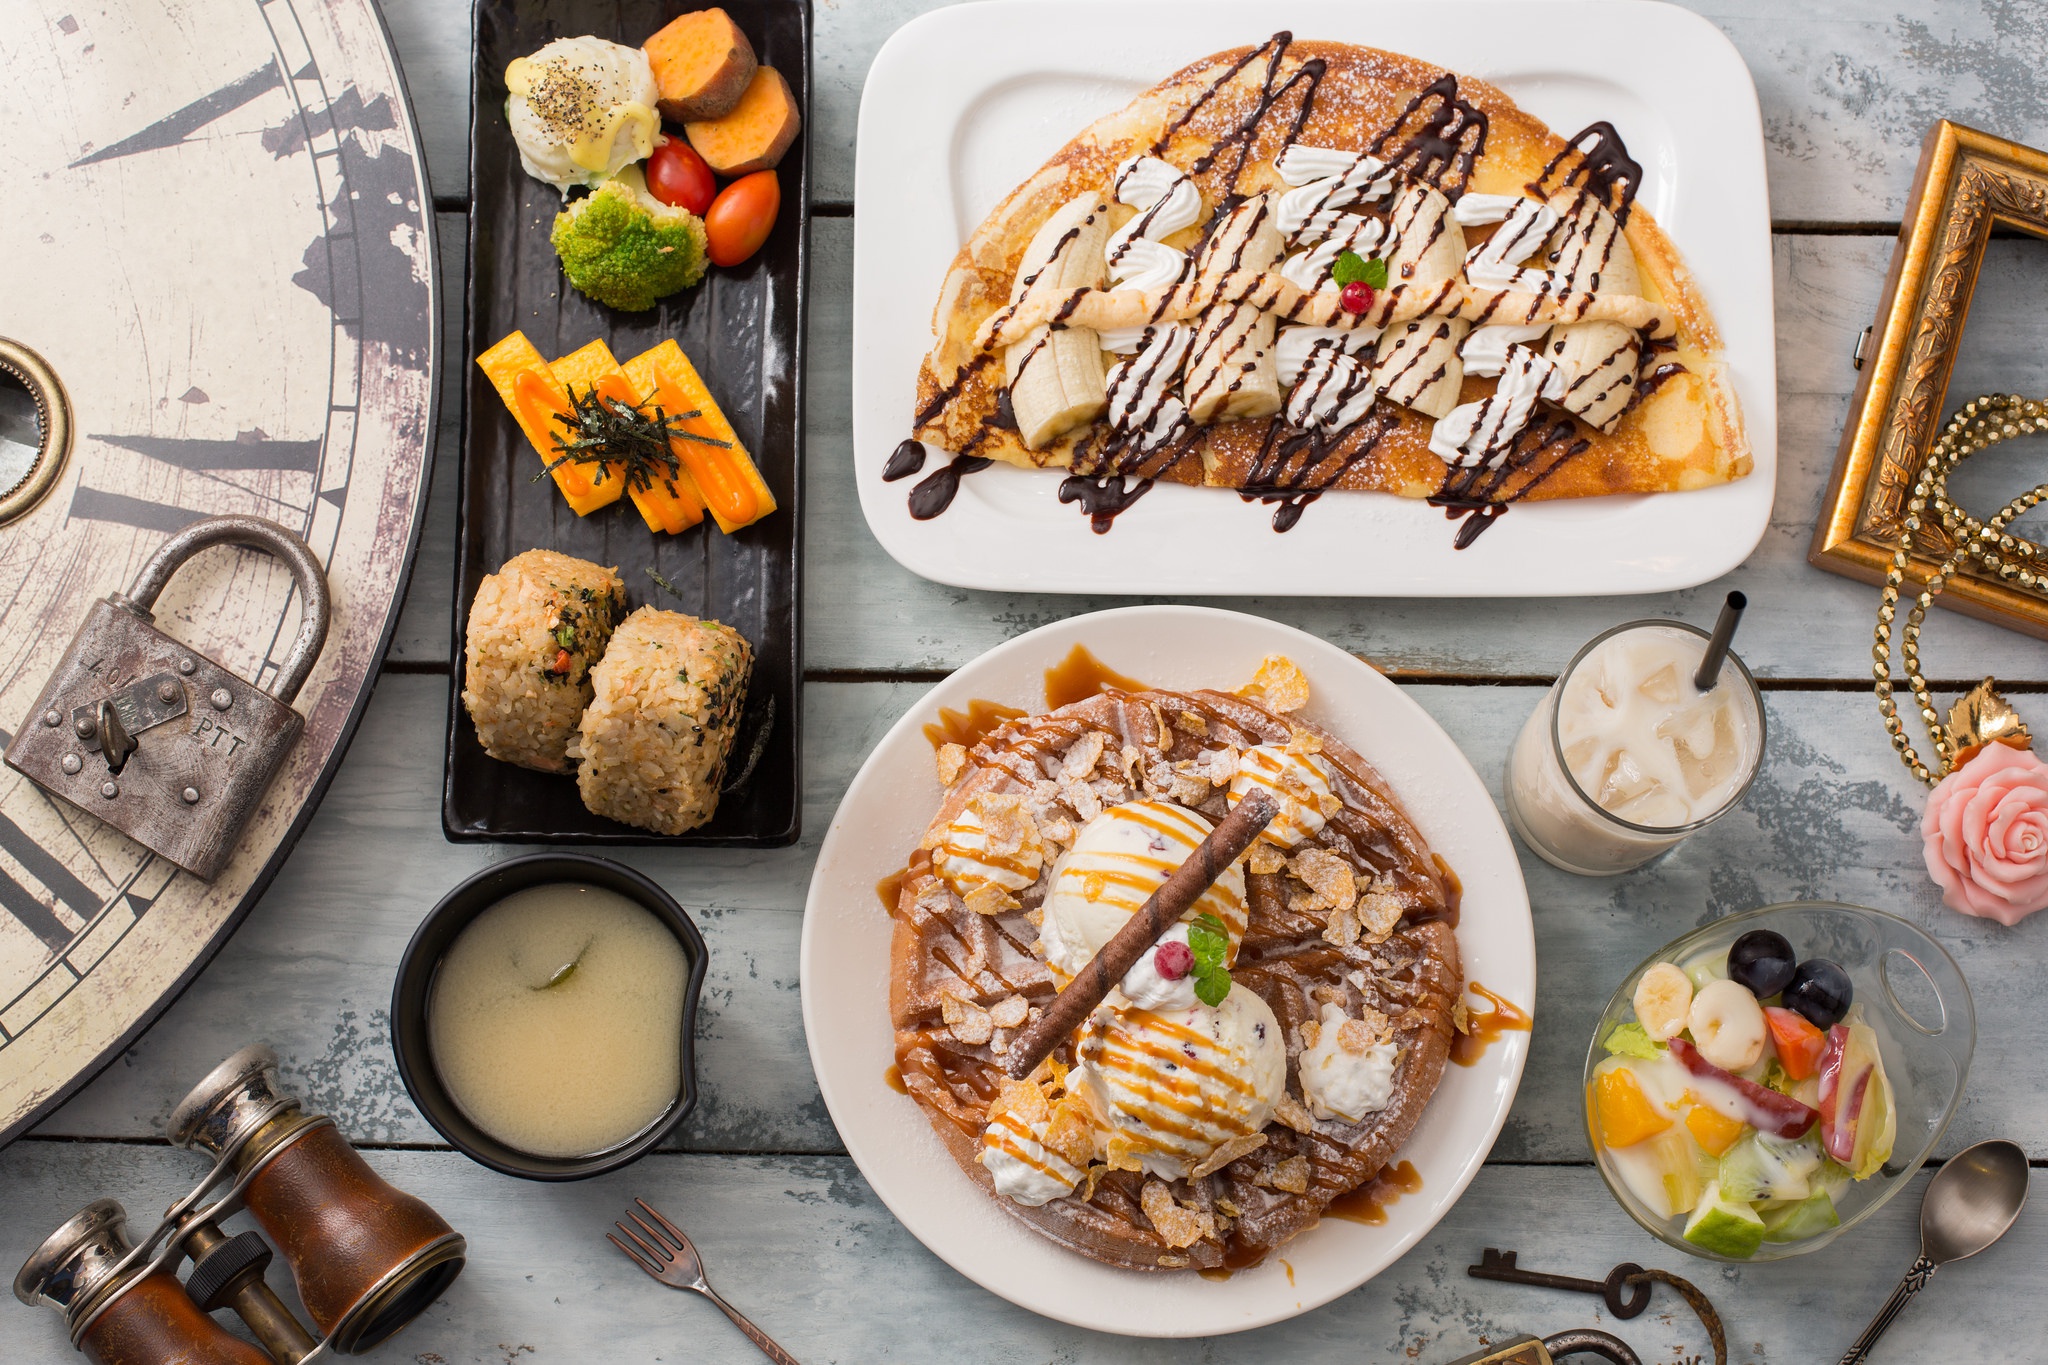 General 2048x1365 food ice cream sweets crepes waffles flowers cinnamon chocolate sauce wooden surface